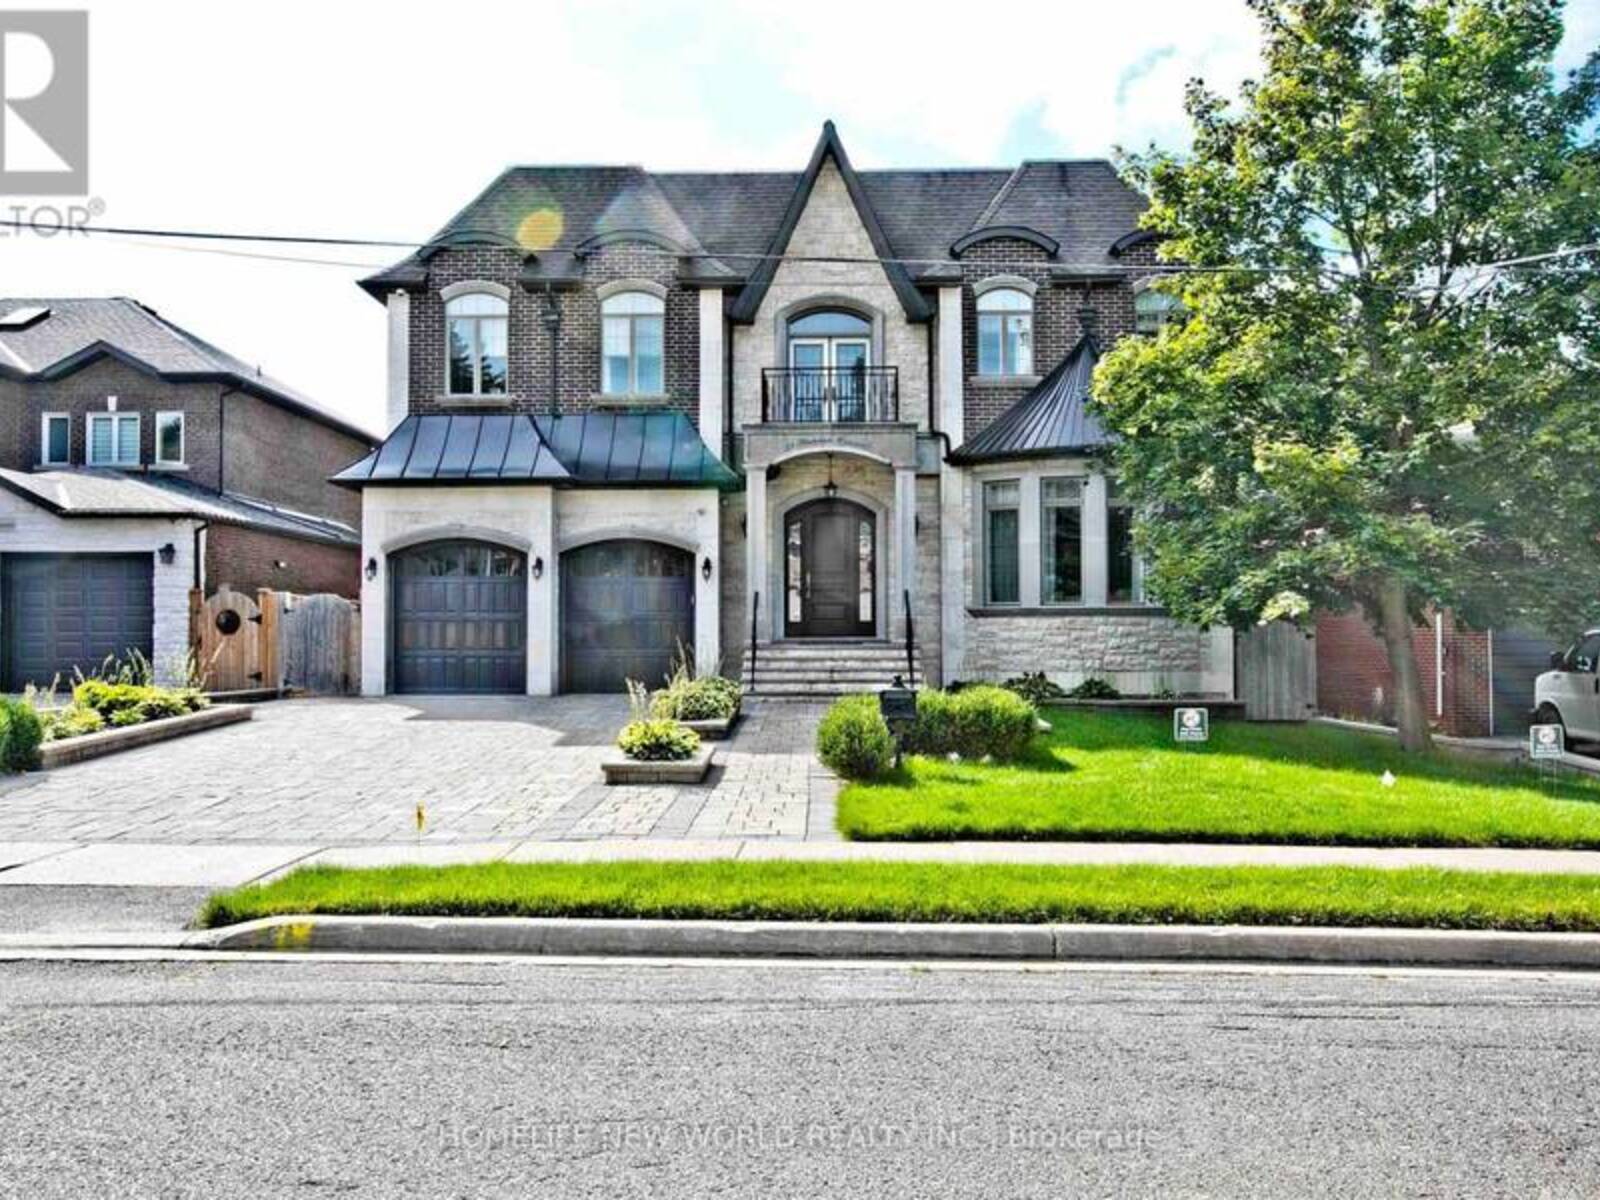 73 STOCKDALE CRES, Richmond Hill, Ontario L4C 3T1